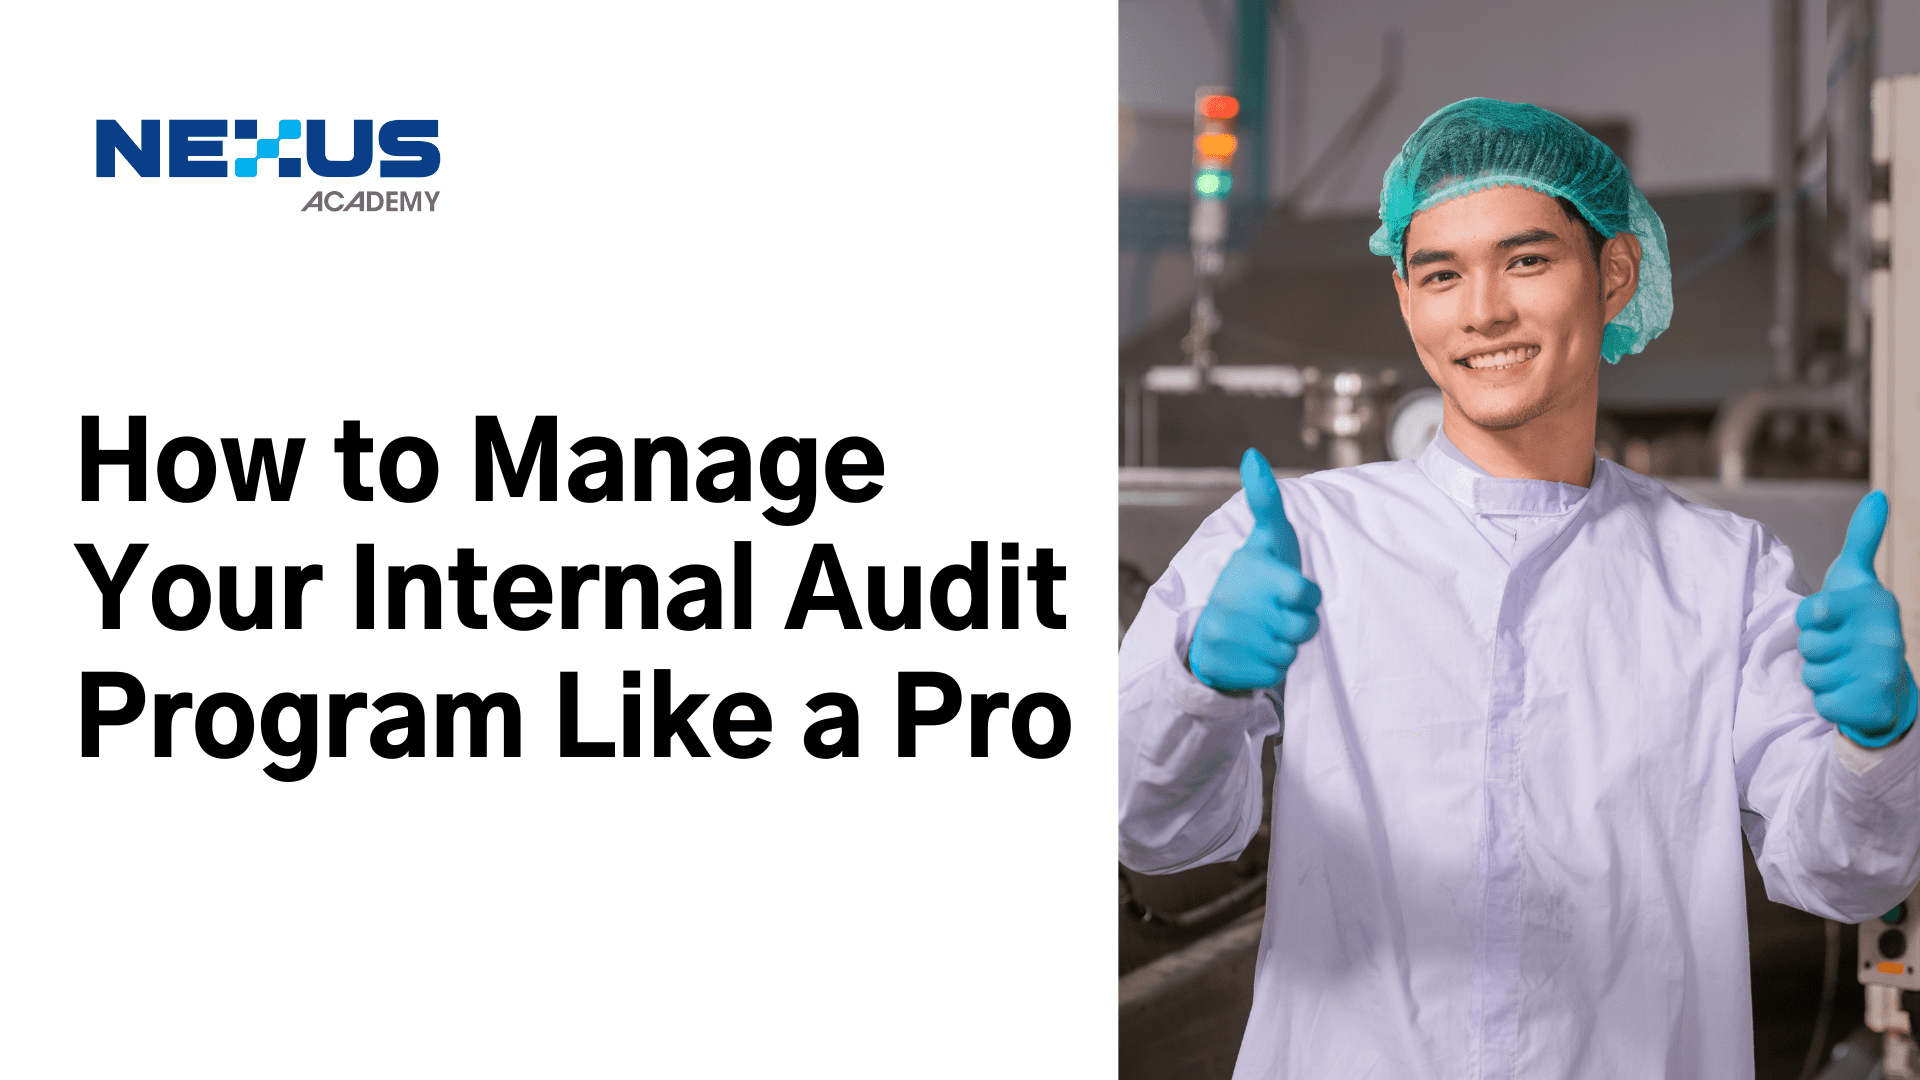 How to Manage Your Internal Audit Program Like a Pro